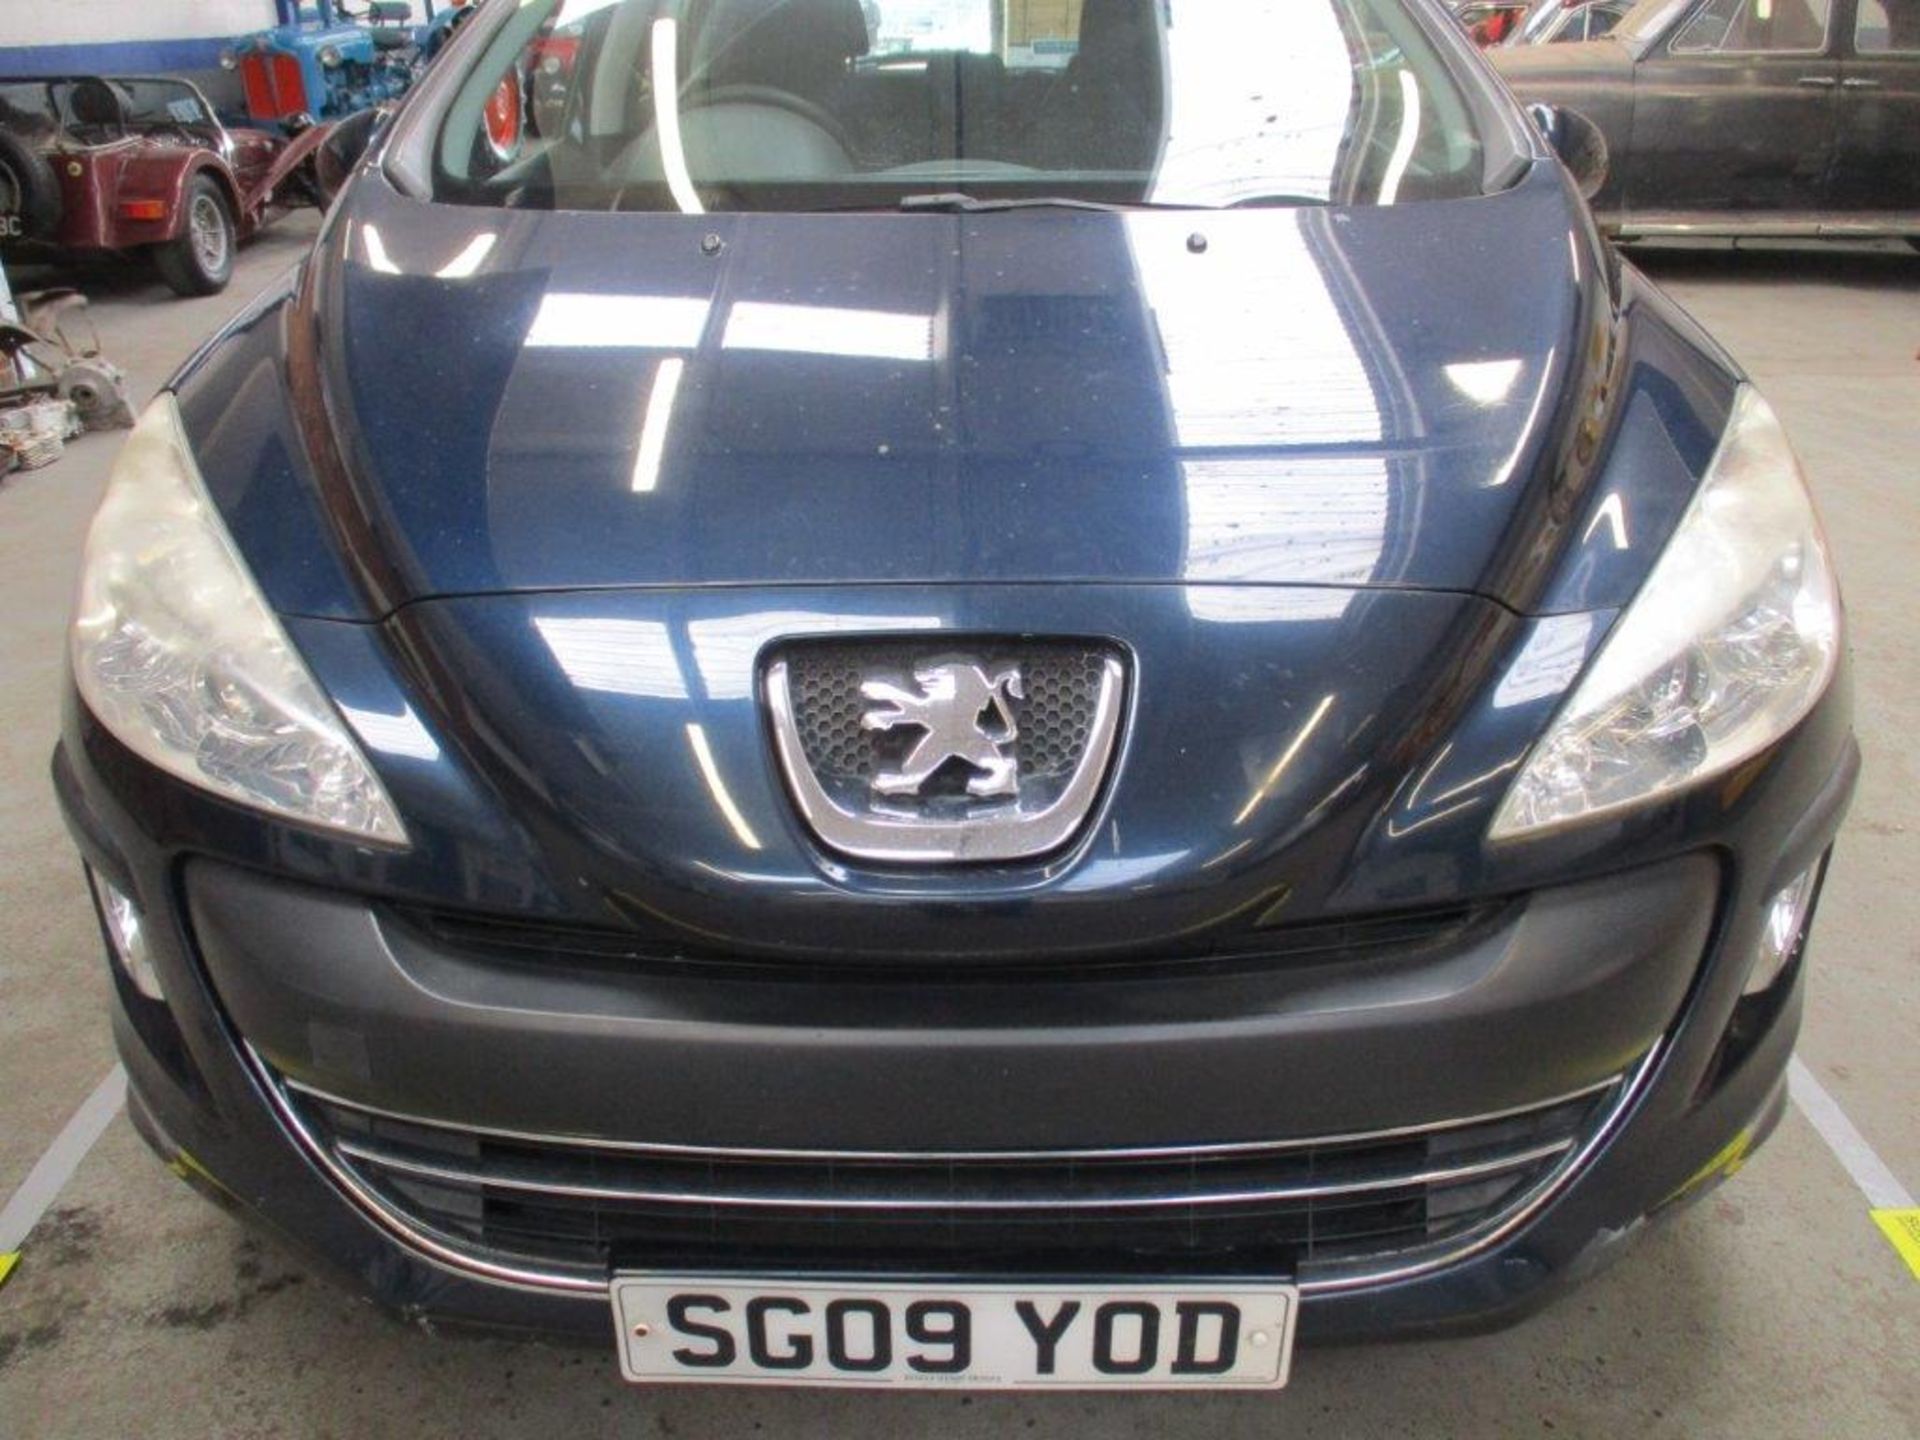 09 09 Peugeot 308 S - Image 4 of 22